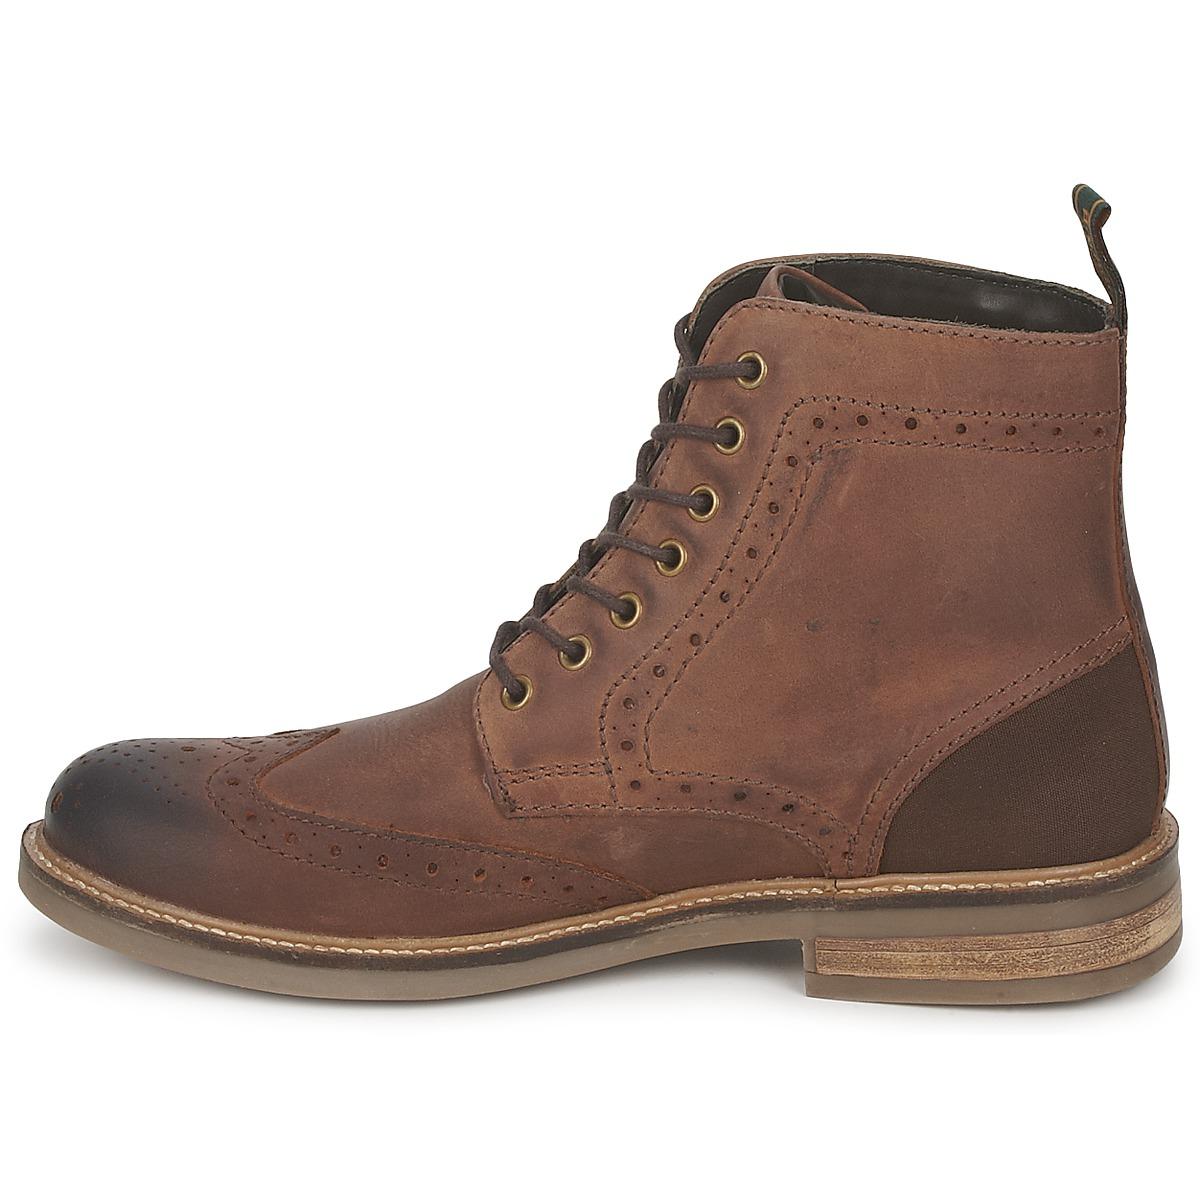 Barbour Belsay Leather Brogue Boots in Tan (Brown) for Men - Lyst